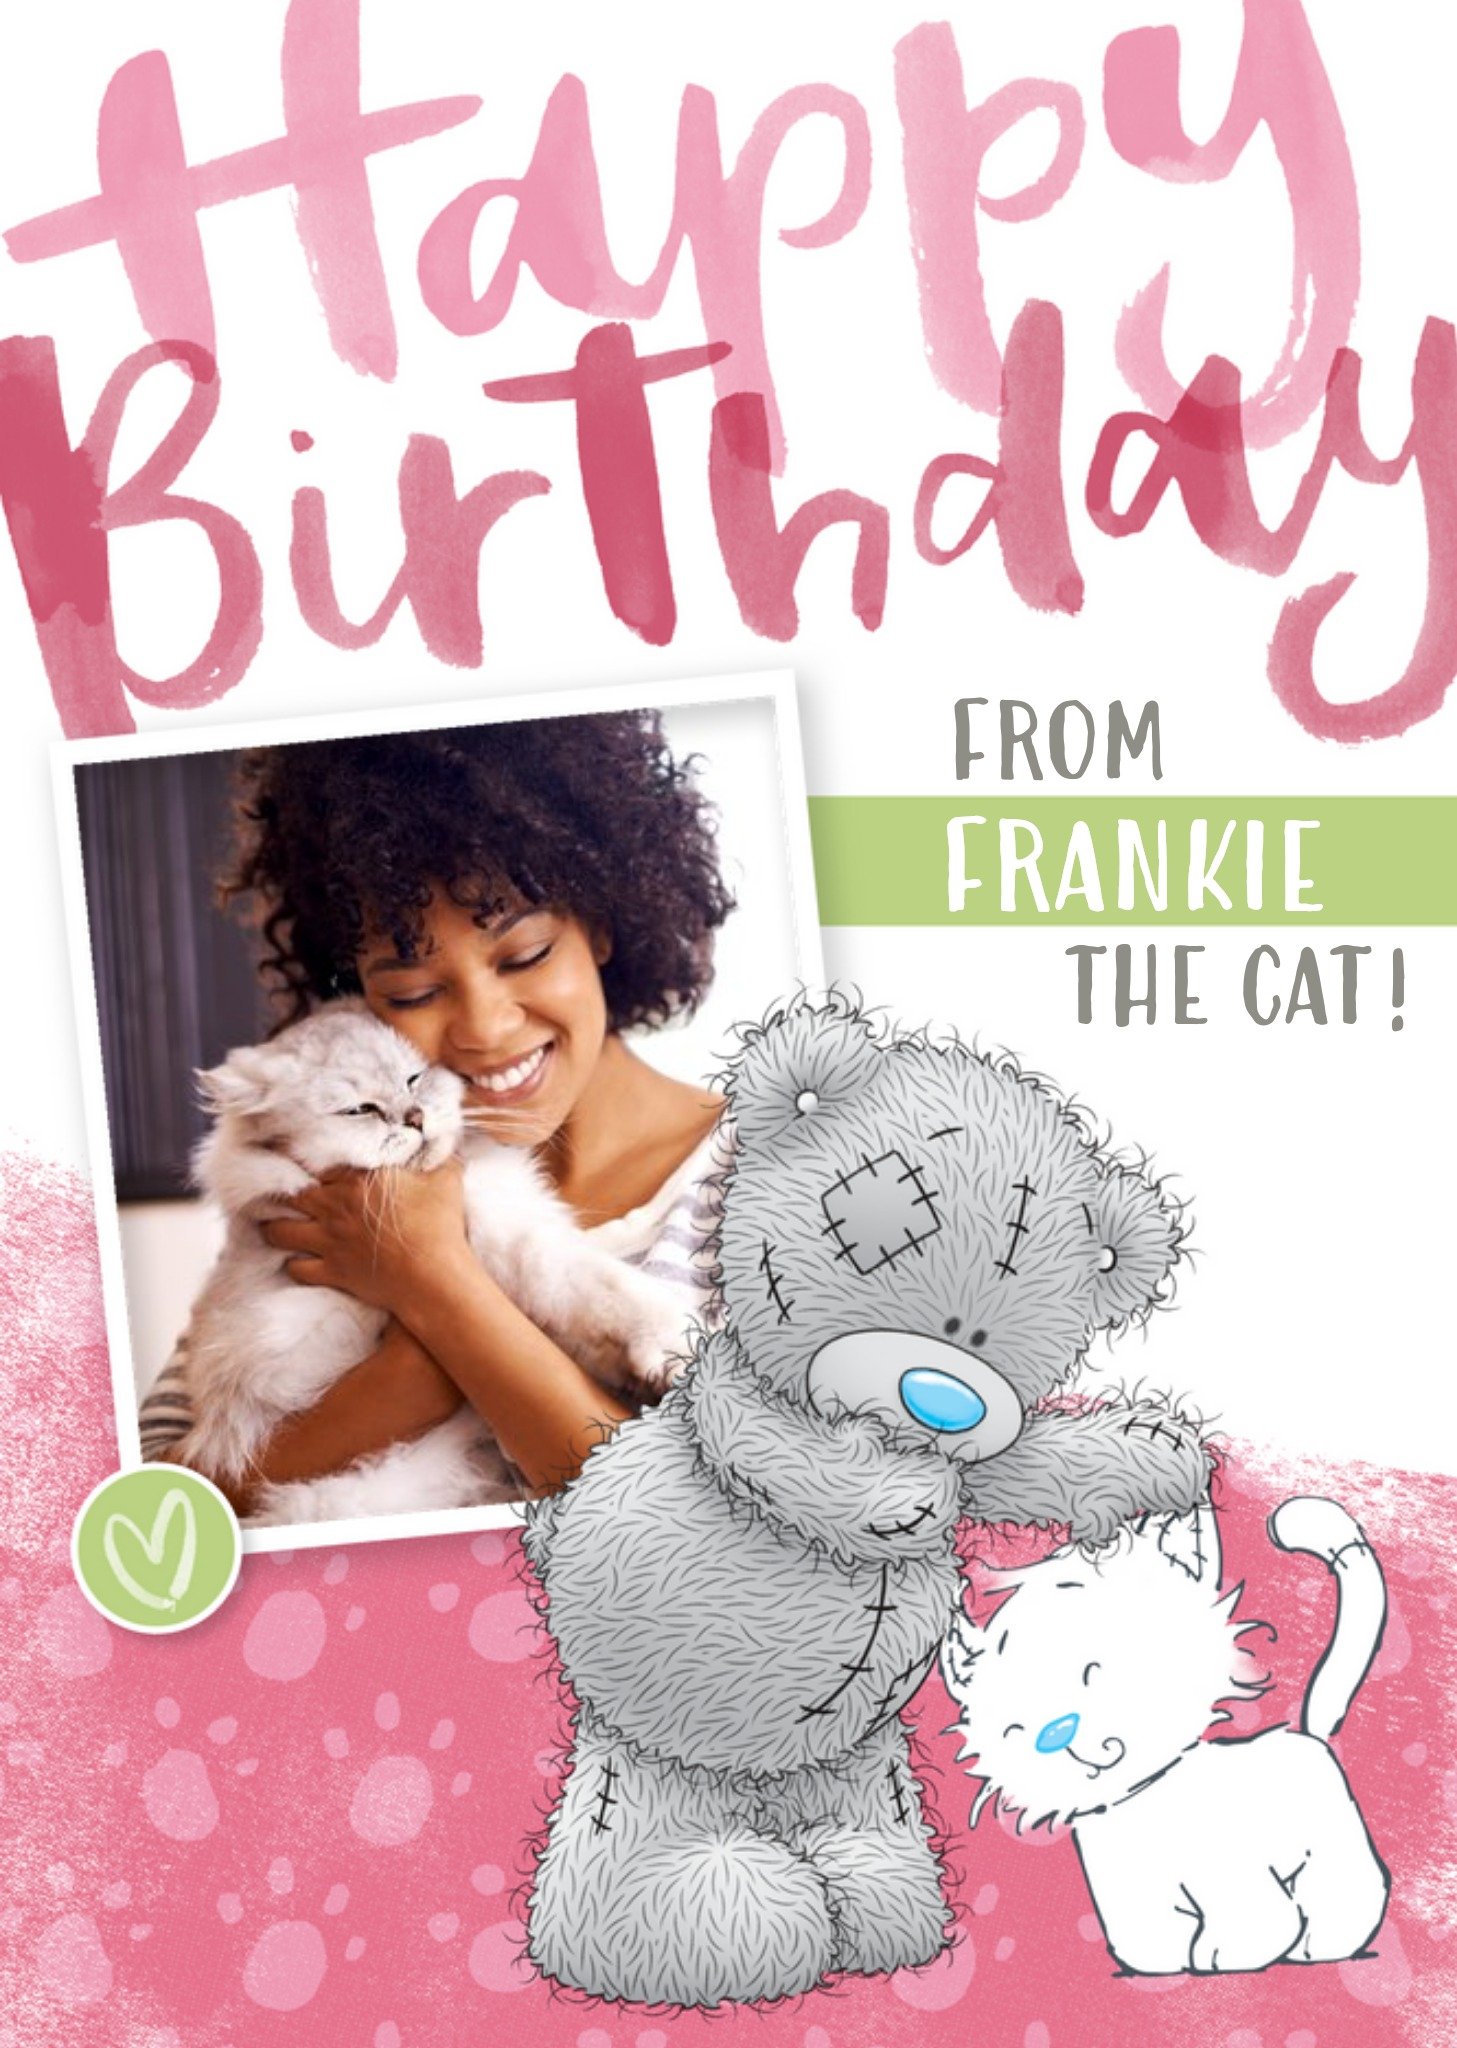 Me To You Tatty Teddy Happy Birthday From The Cat Card Ecard